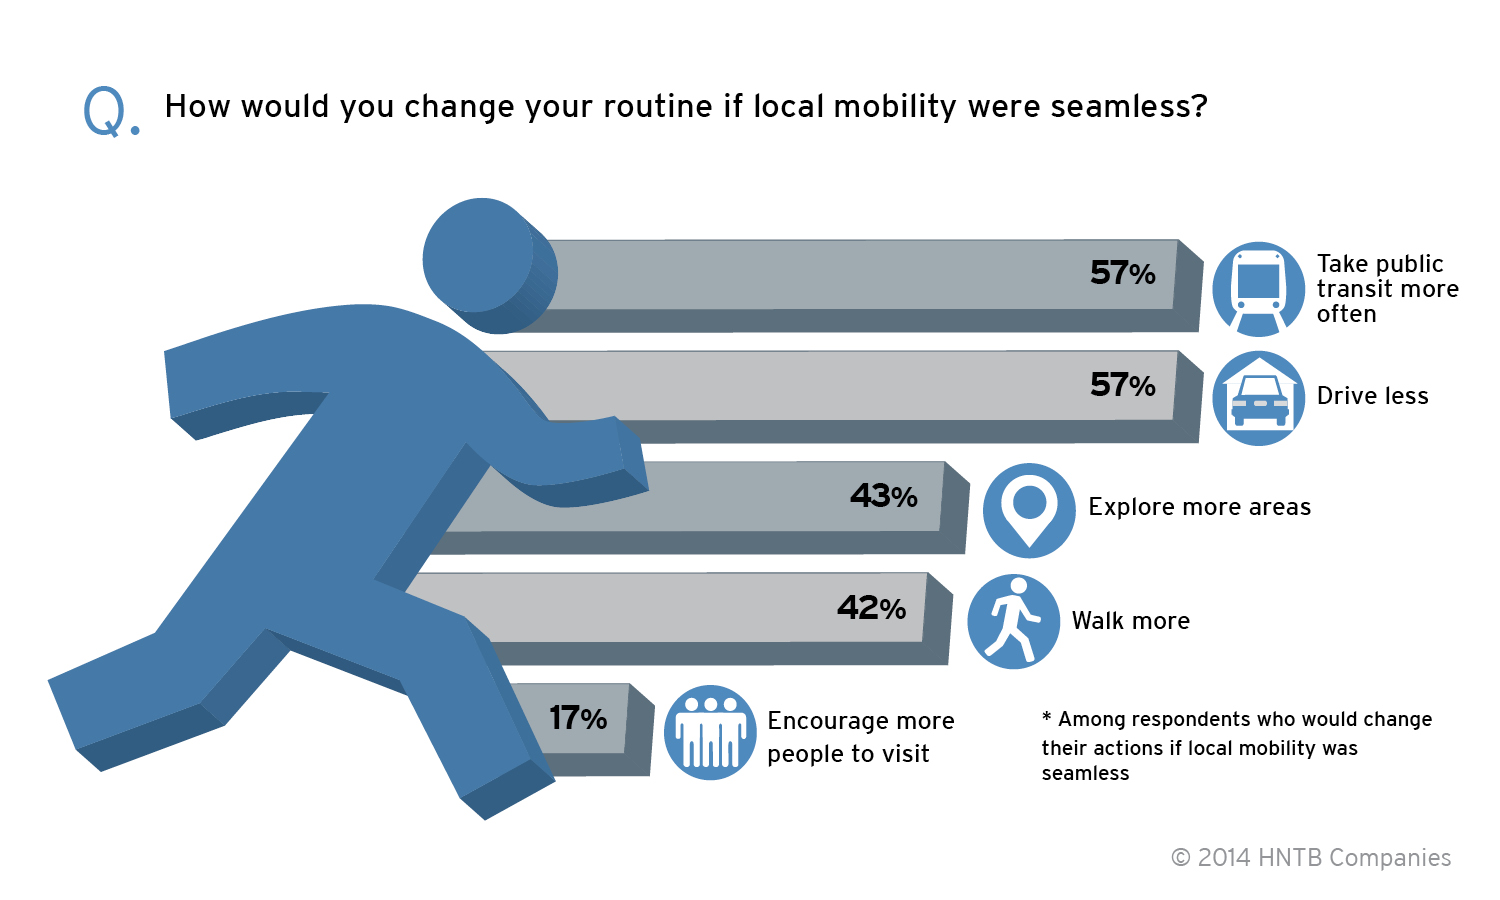 Seventy percent of Americans would alter their actions if local mobility was seamless, with many taking public transit more (57 percent) and driving less (57 percent).